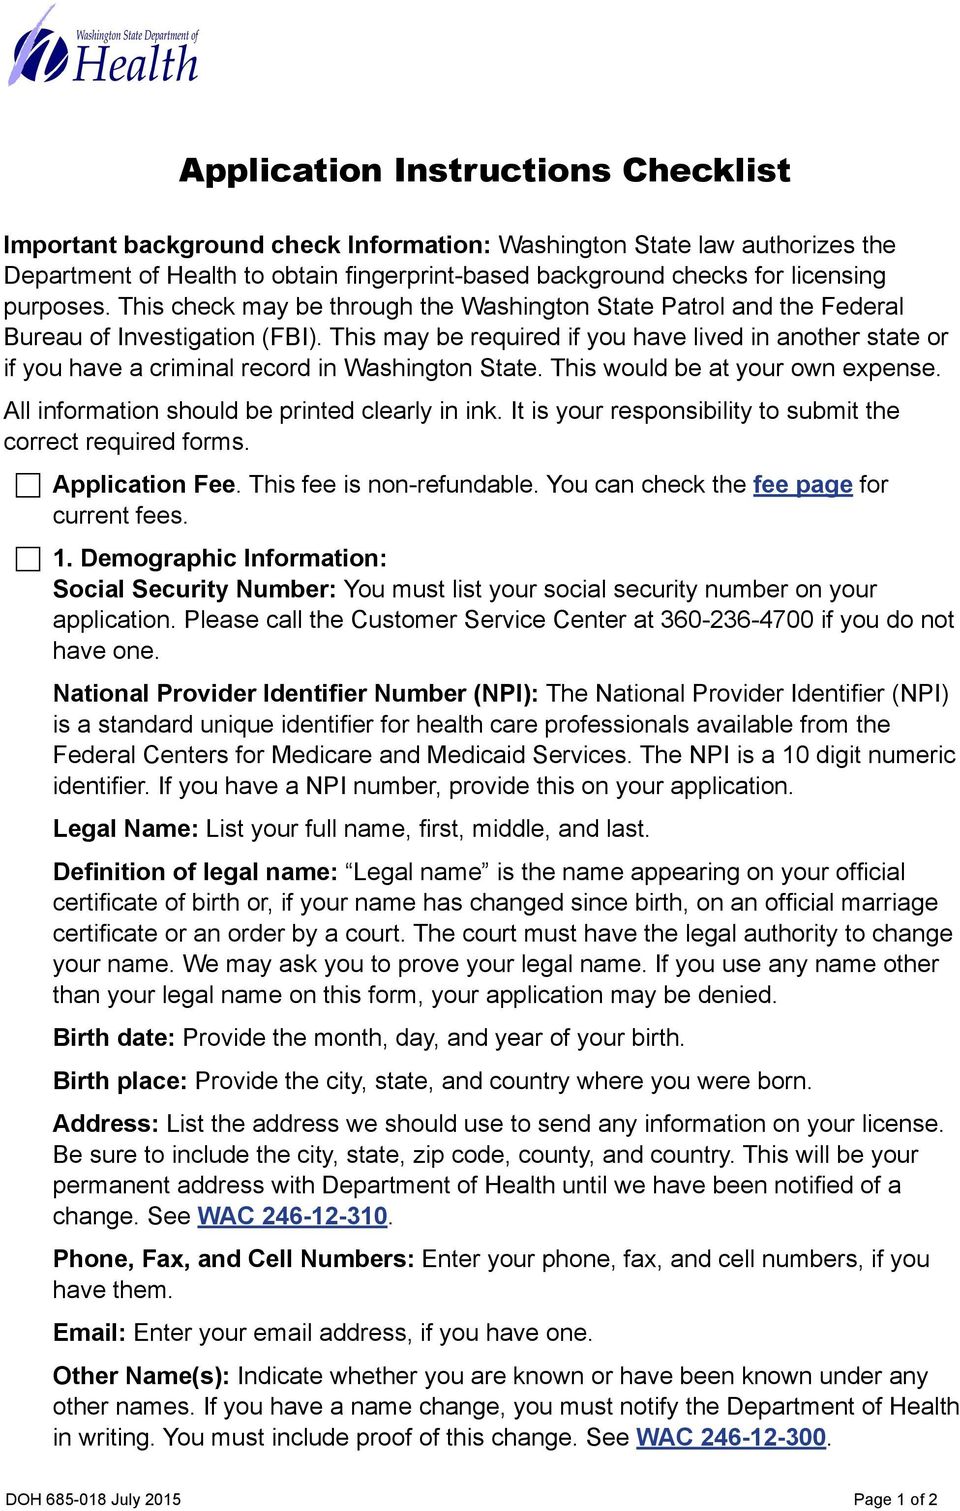 This may be required if you have lived in another state or if you have a criminal record in Washington State. This would be at your own expense. All information should be printed clearly in ink.